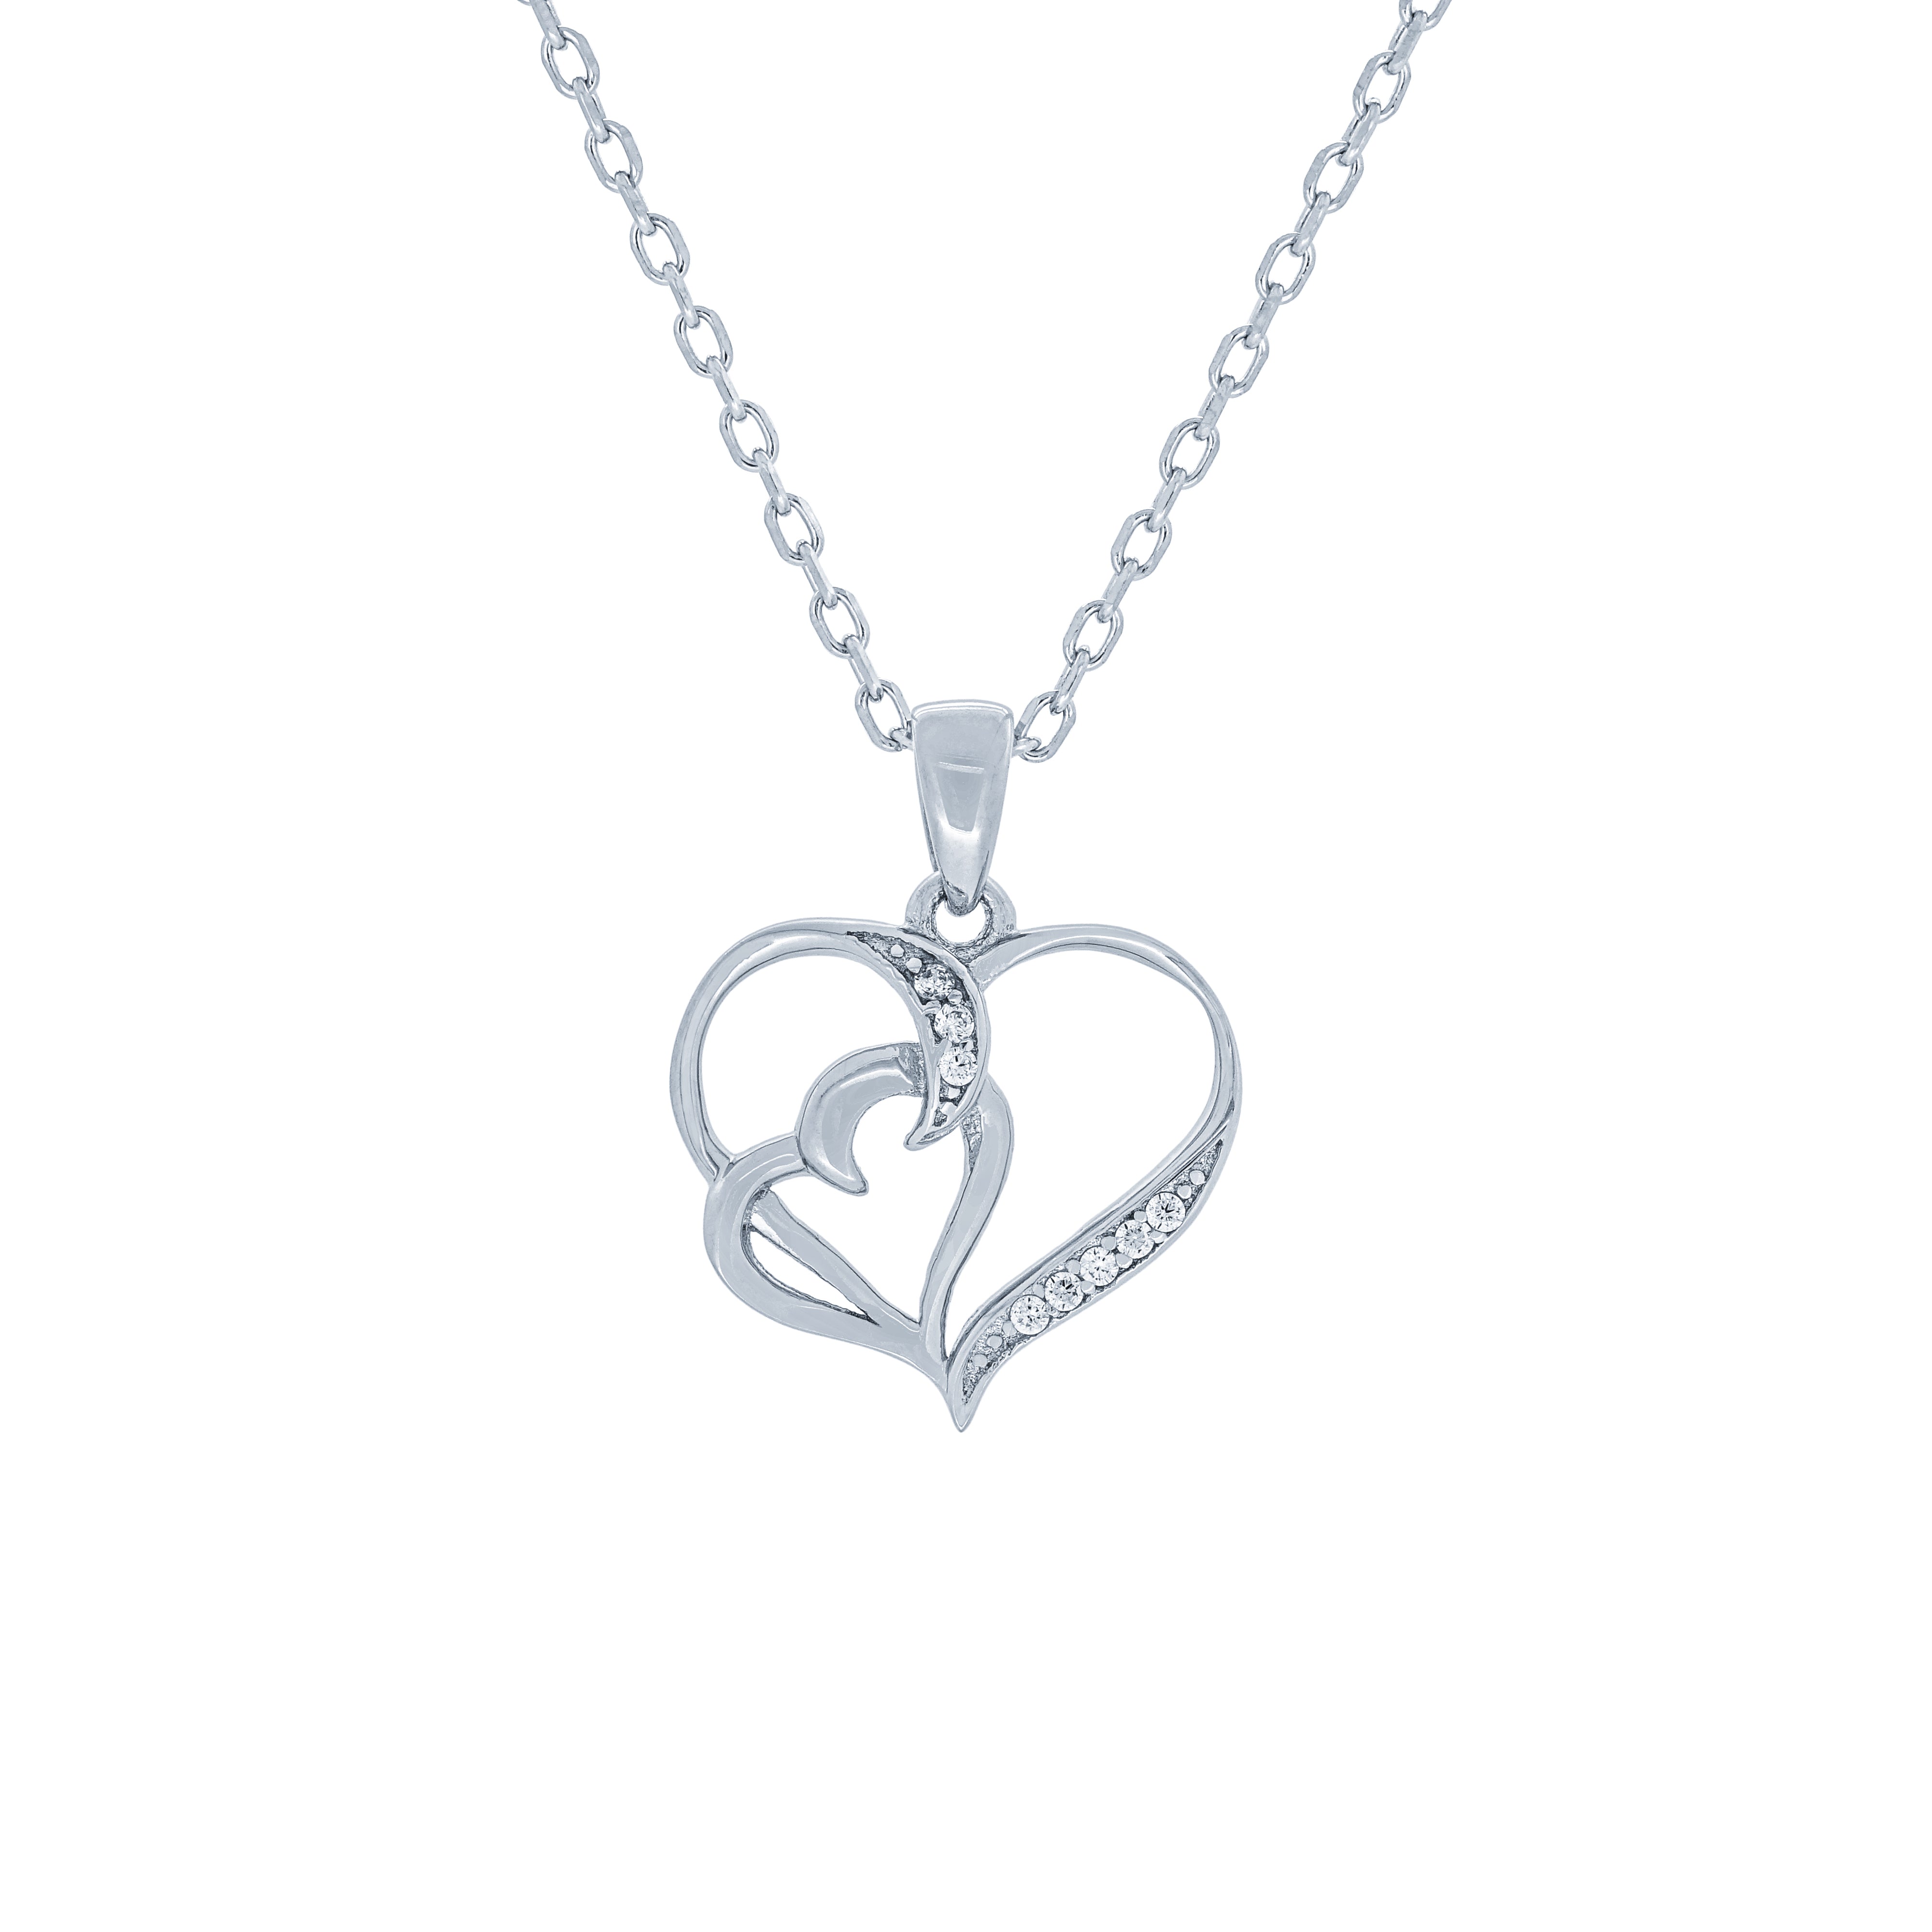 (100151) White Cubic Zirconia Heart Pendant Necklace In Sterling Silver